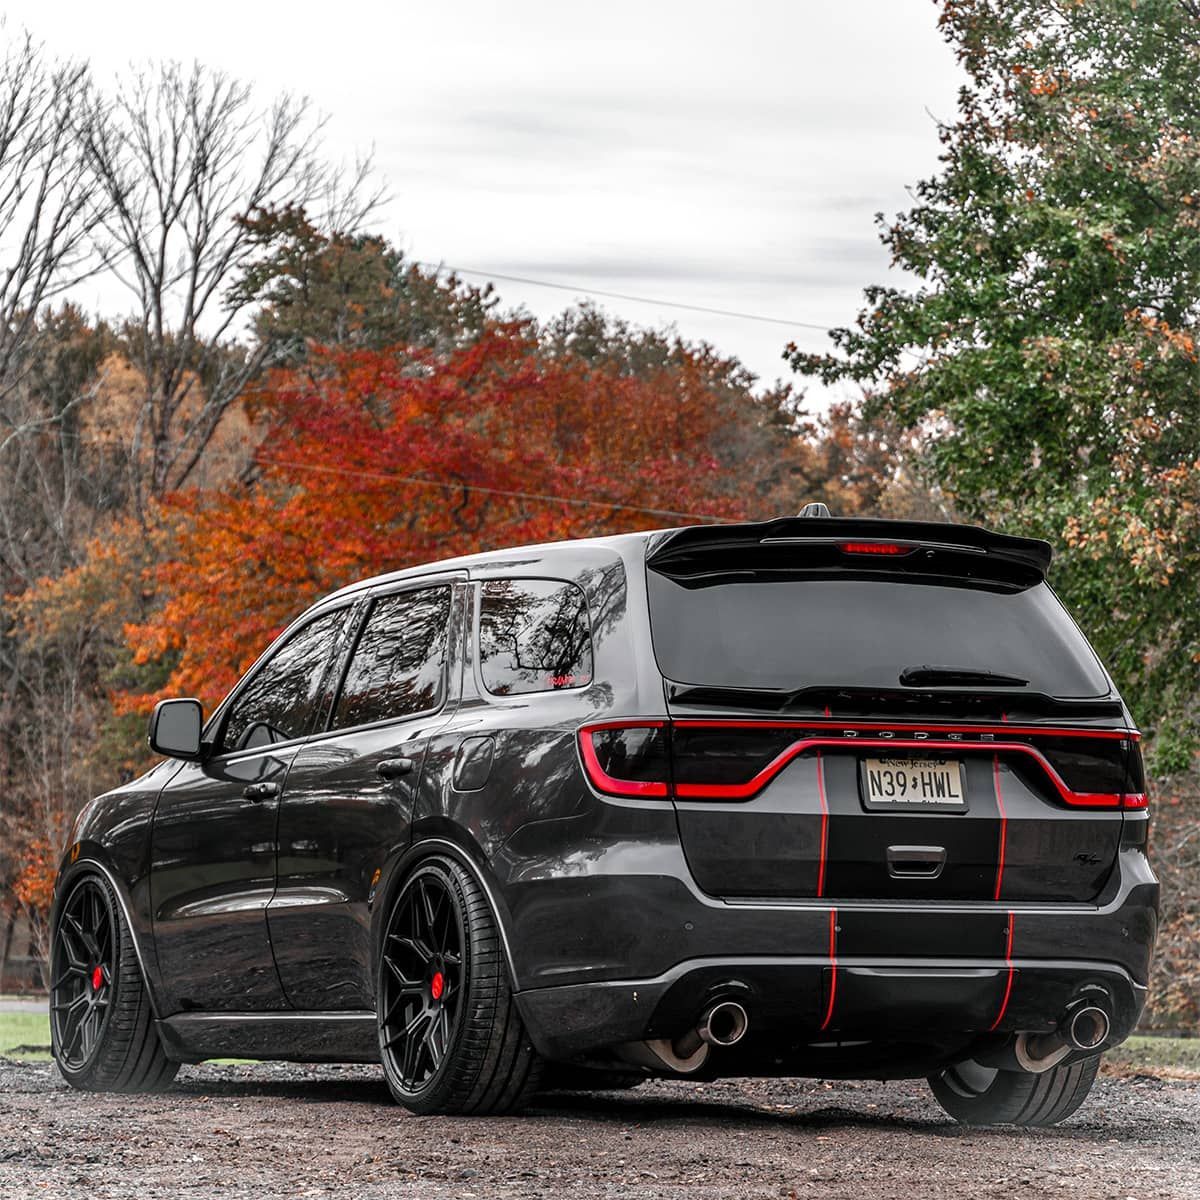 Bagged Dodge Durango R/T With Air Suspension & Lots of Mods - MuscleCarDNA